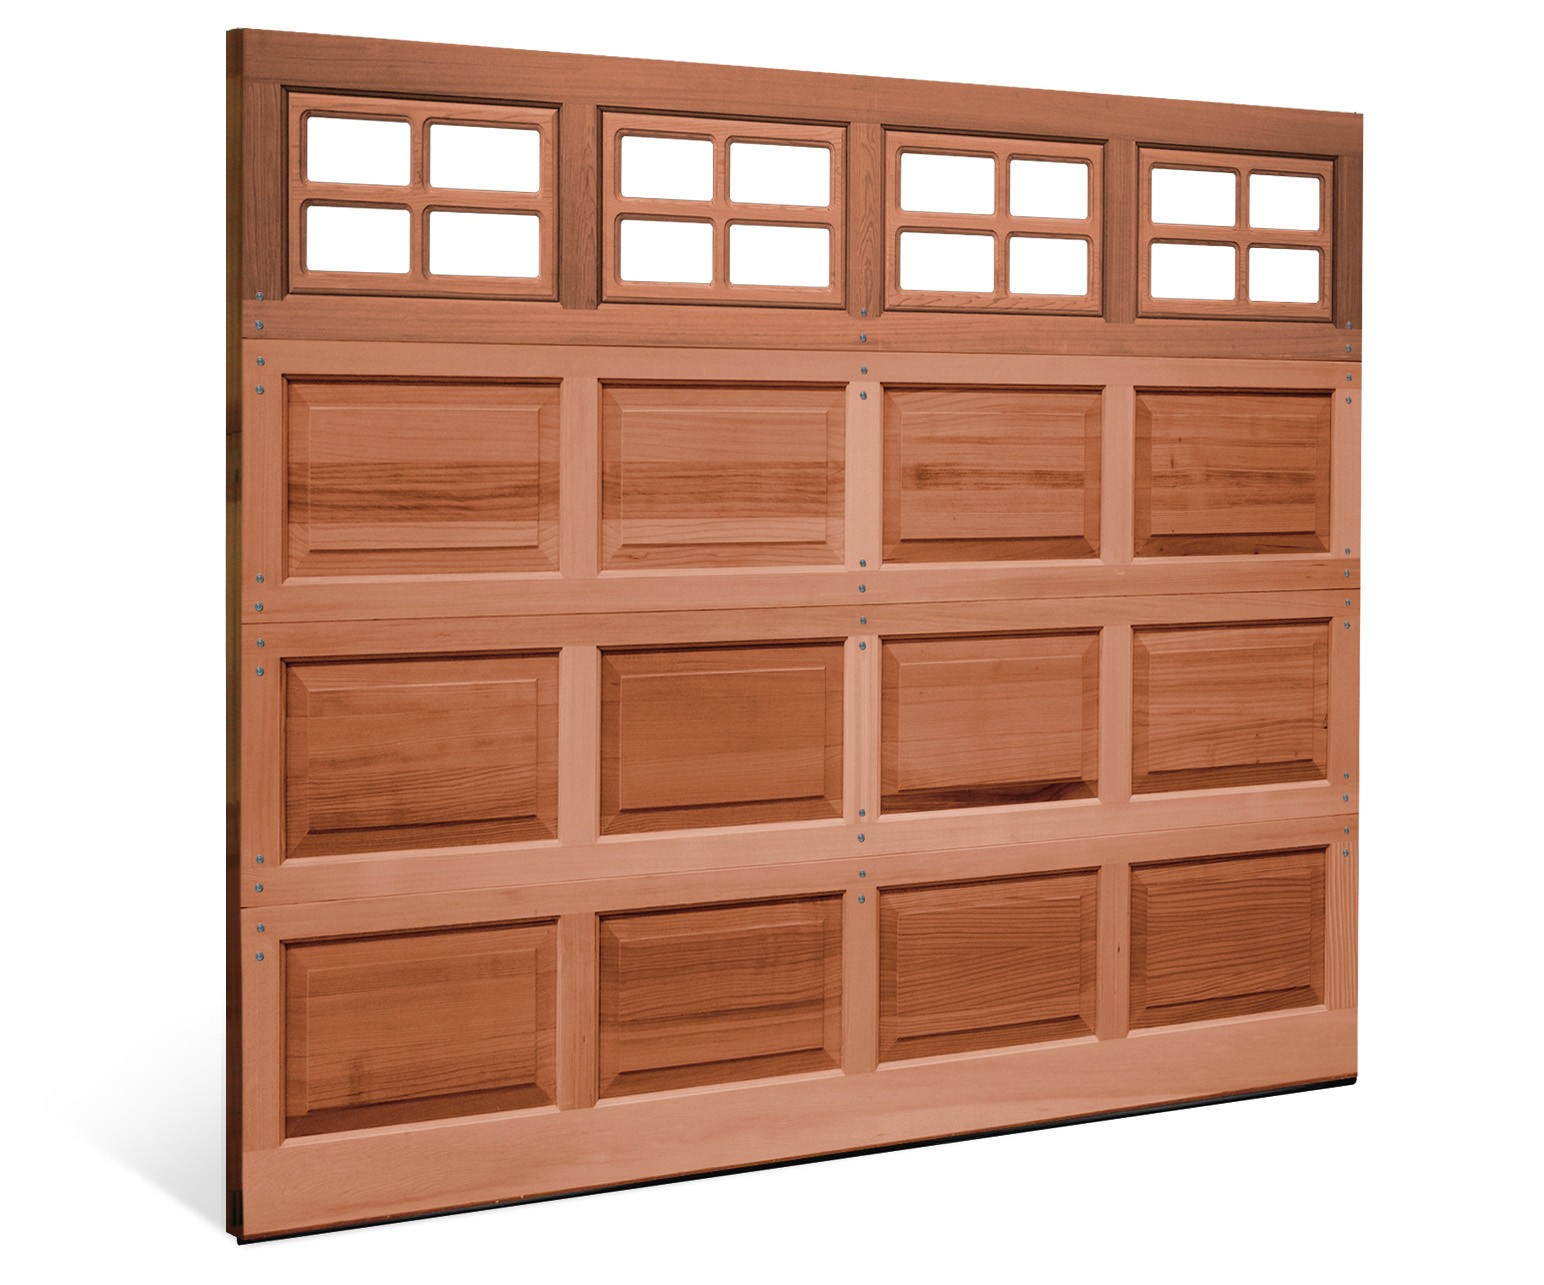 HAND CRAFTED WOOD GARAGE DOOR INSTALLED PRICING One Clear Choice Garage ...